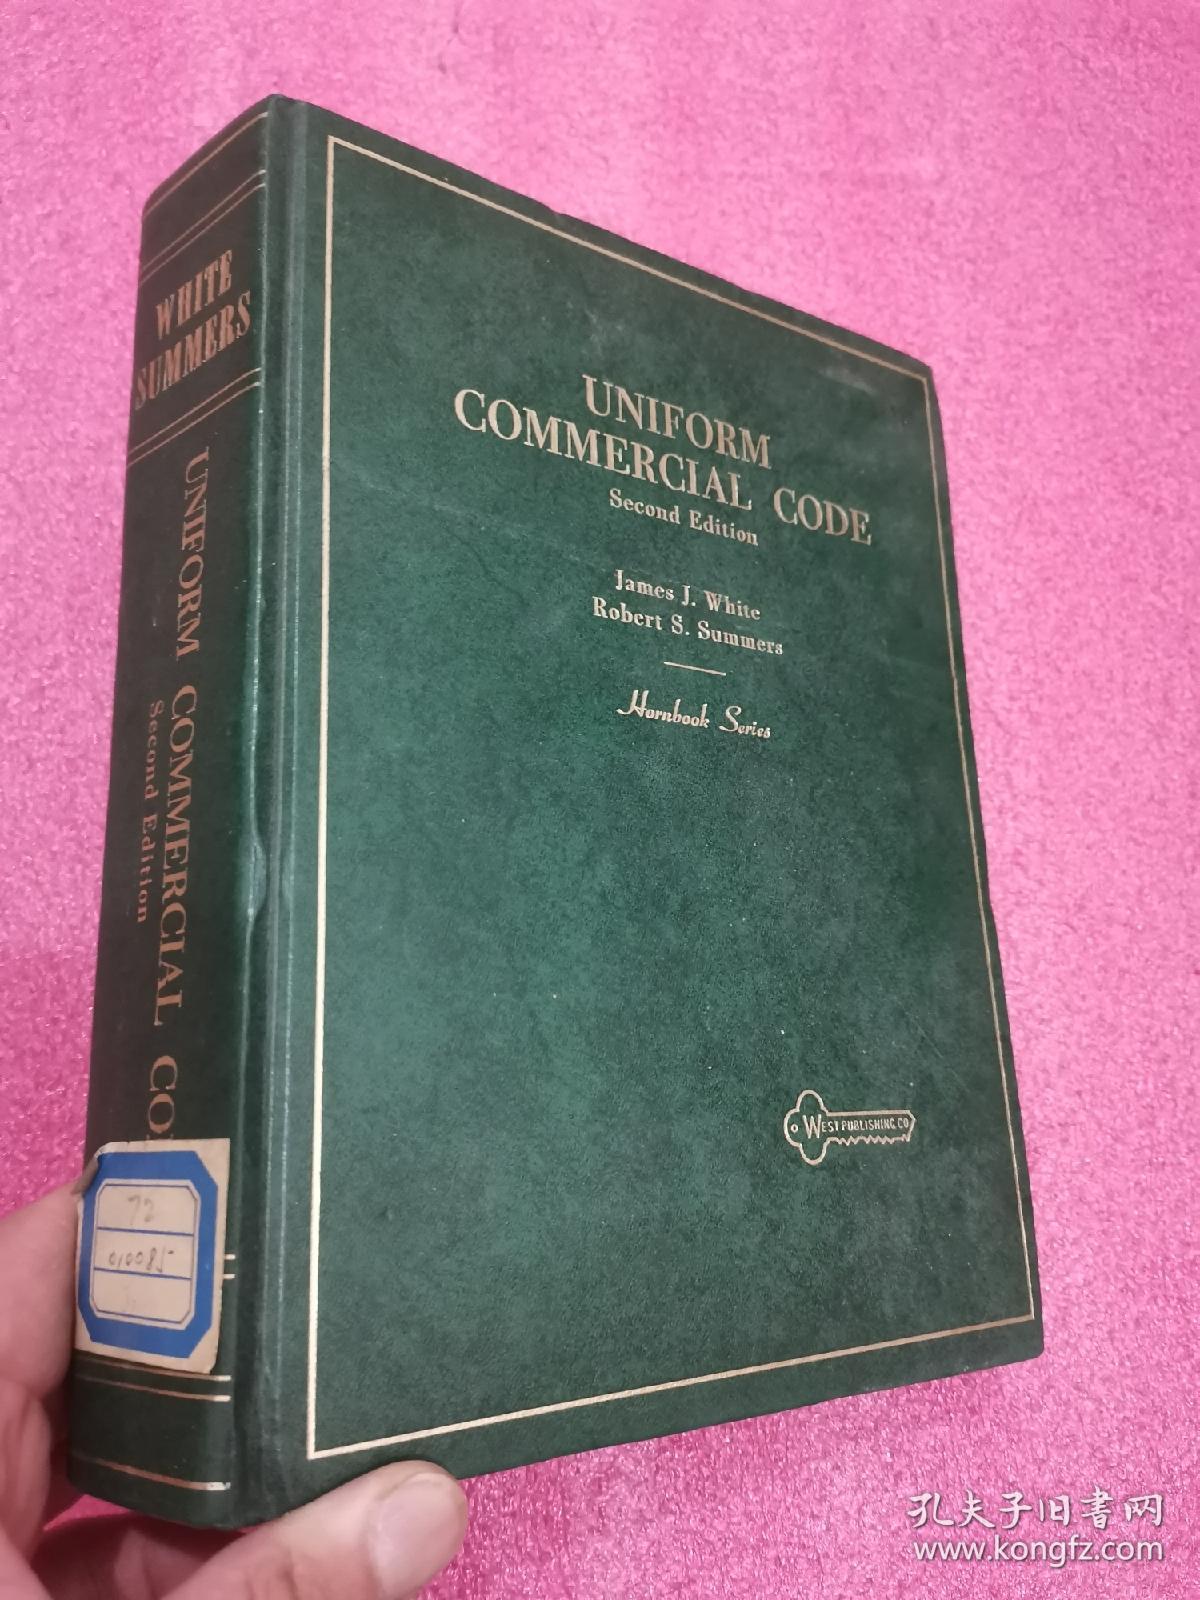 UNIFORM COMMERCIAL CODE (Second Edition)   16开 ，精装